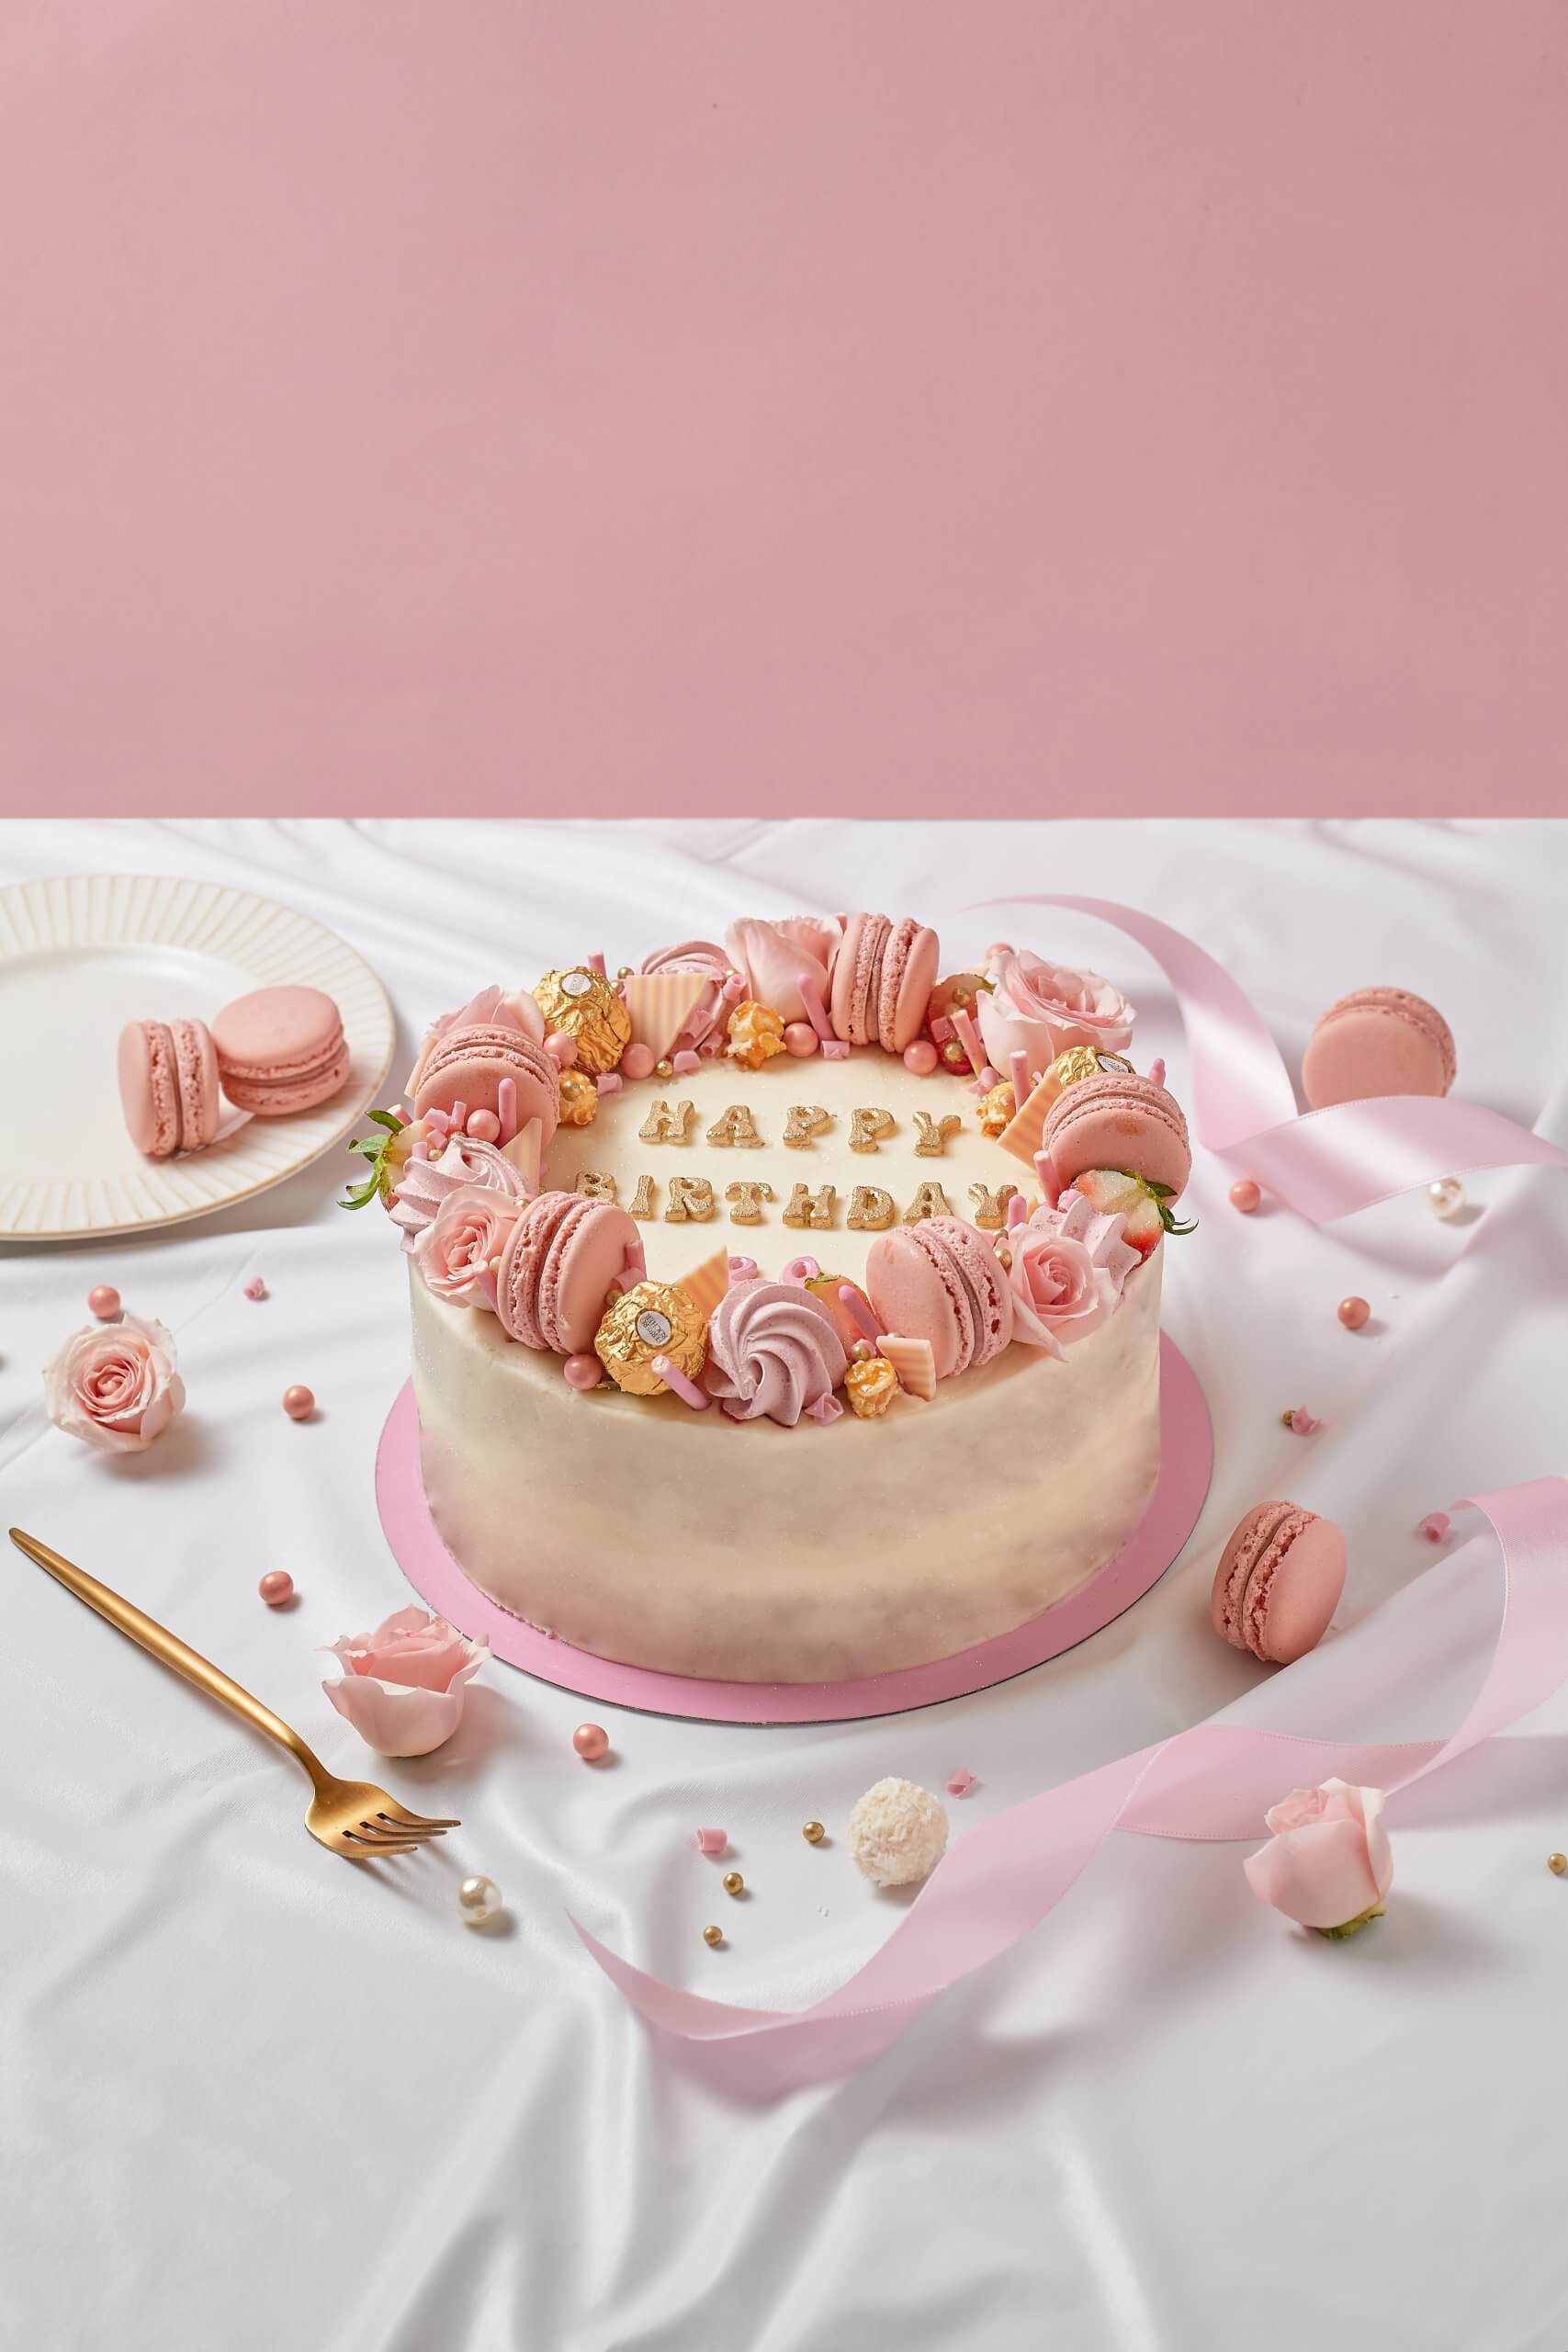 Pink and white cake | Wedding cakes, Pink cake, Pretty cakes